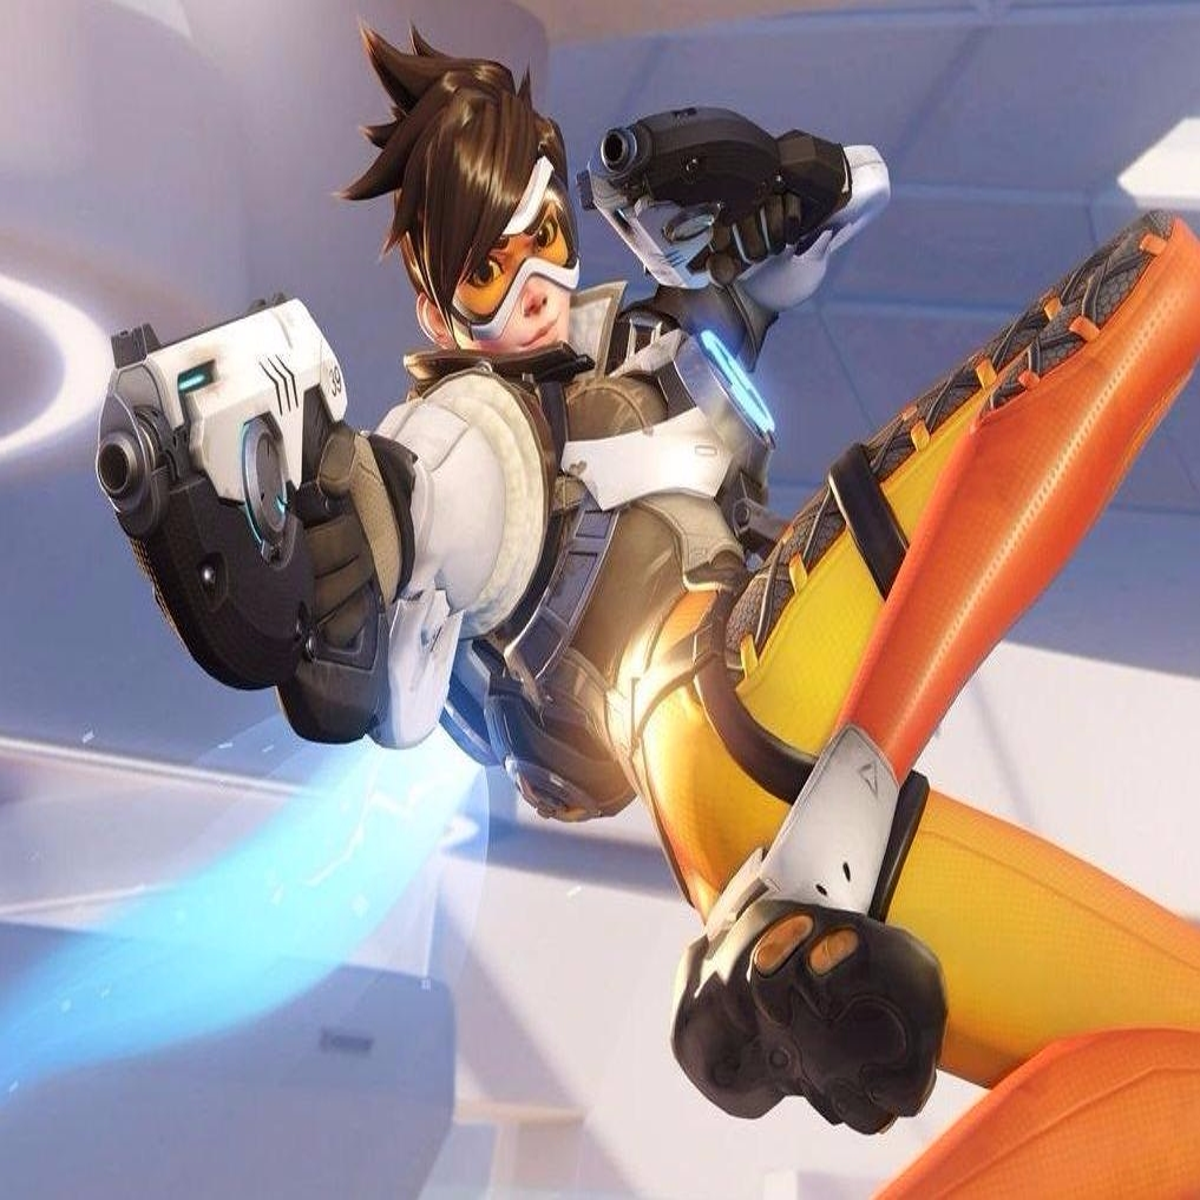 ovn læser afsked What does the Overwatch PS4 Pro patch actually do? | Eurogamer.net